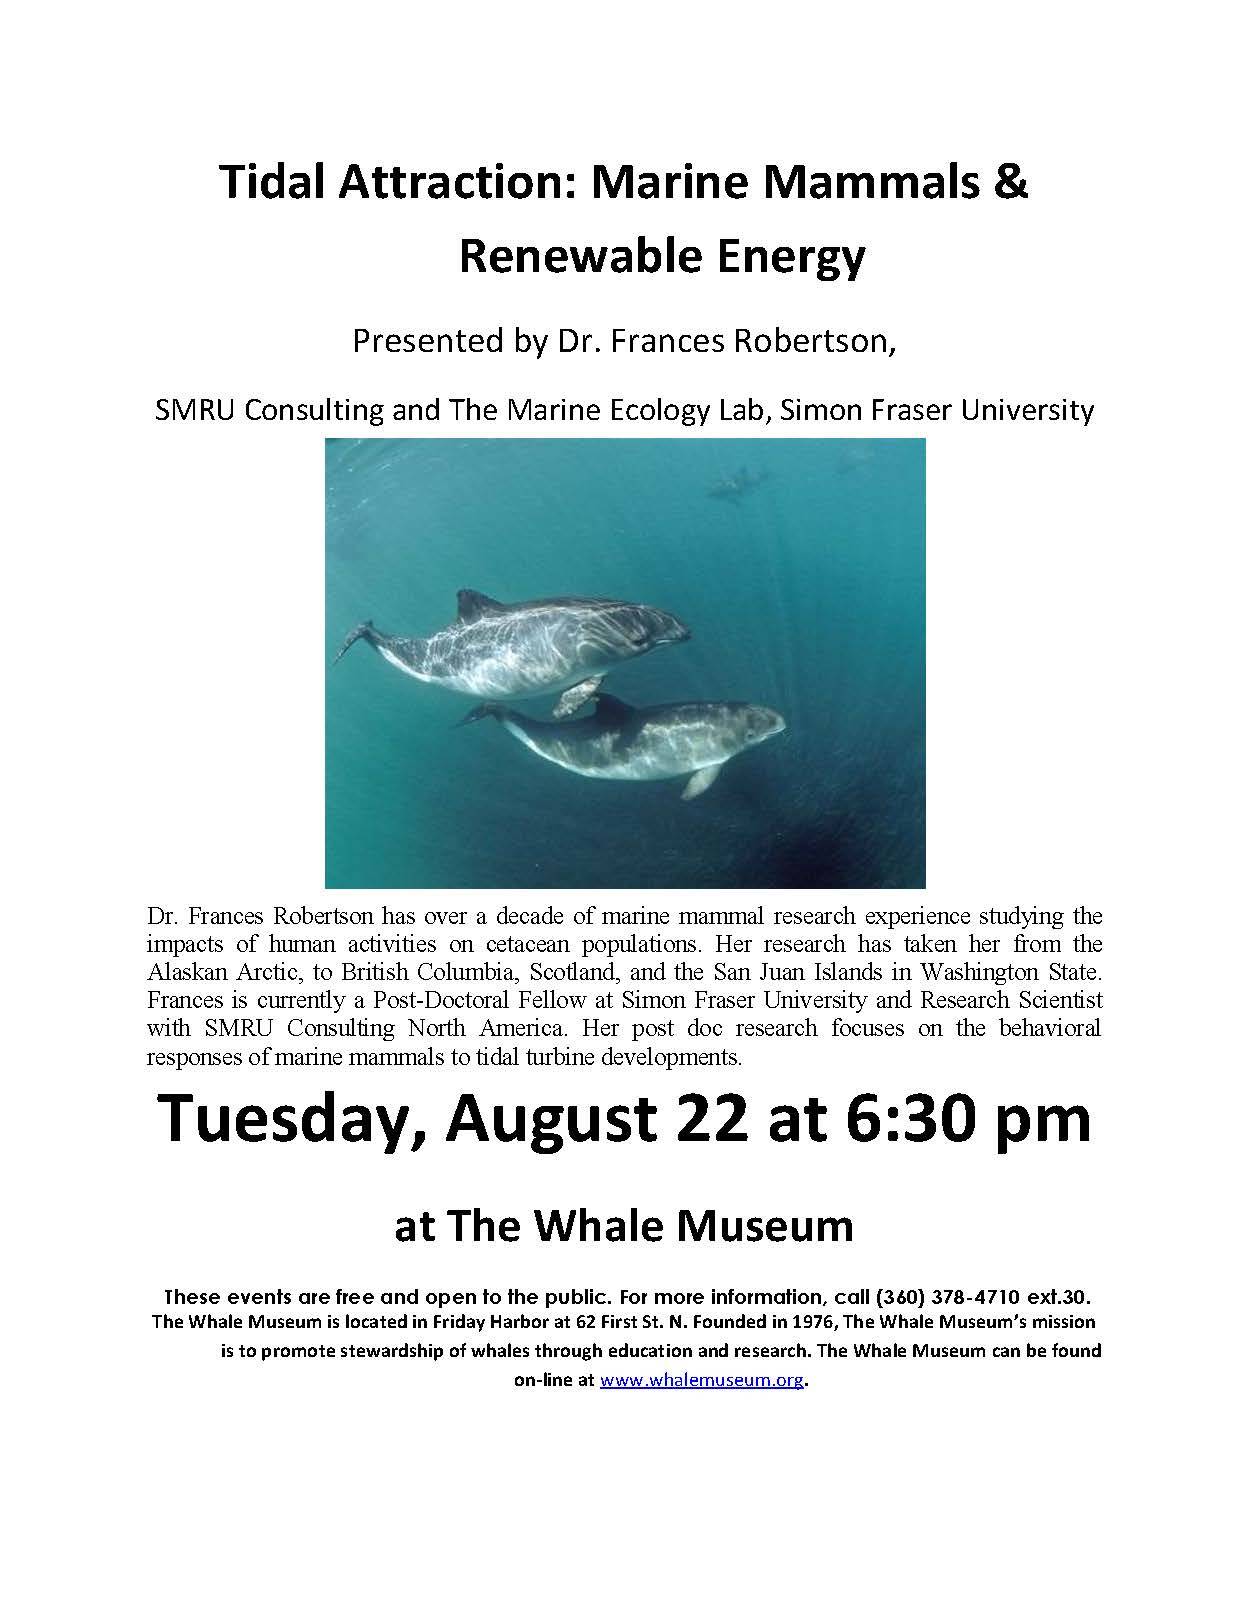 Whale Museum lecture on Aug. 22